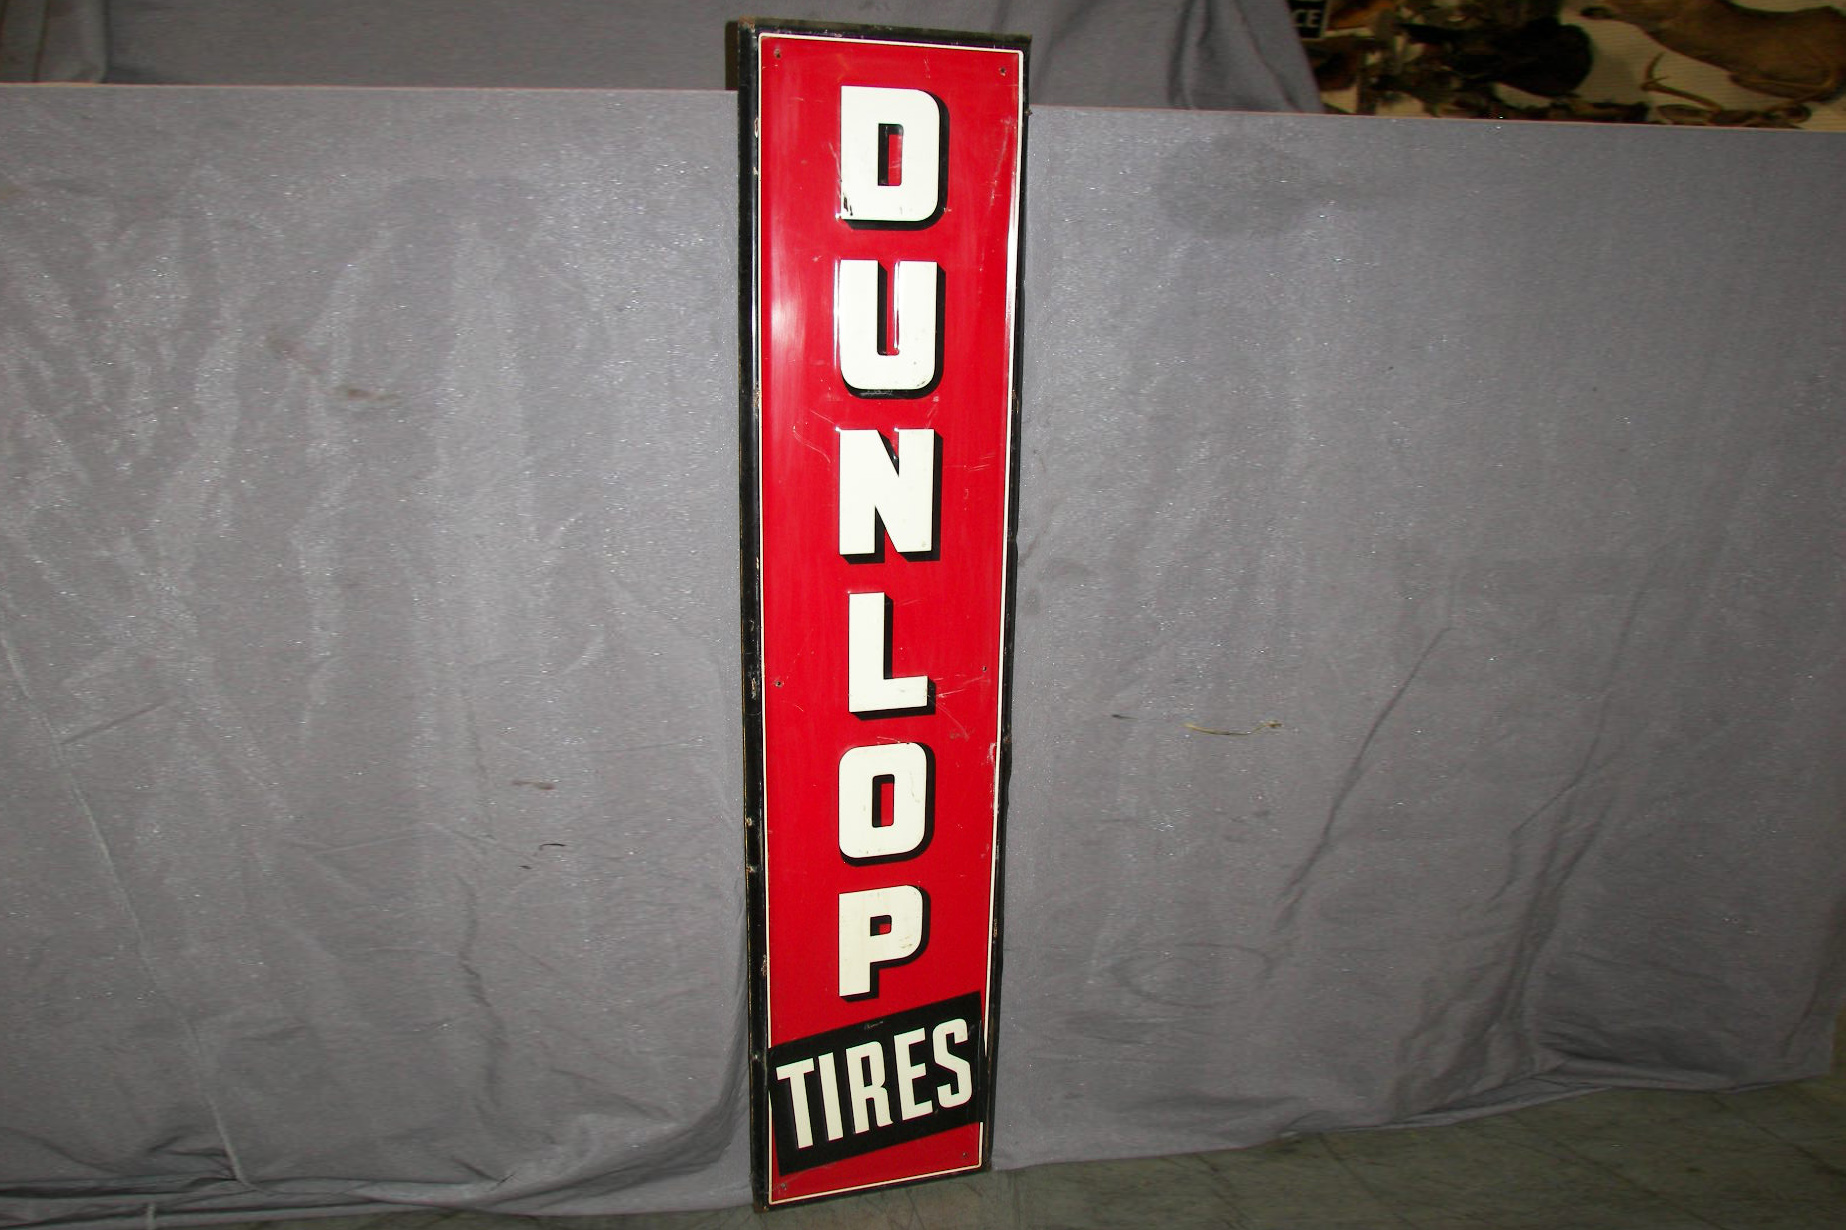 0th Image of a N/A DUNLOP TIRES METAL SIGN